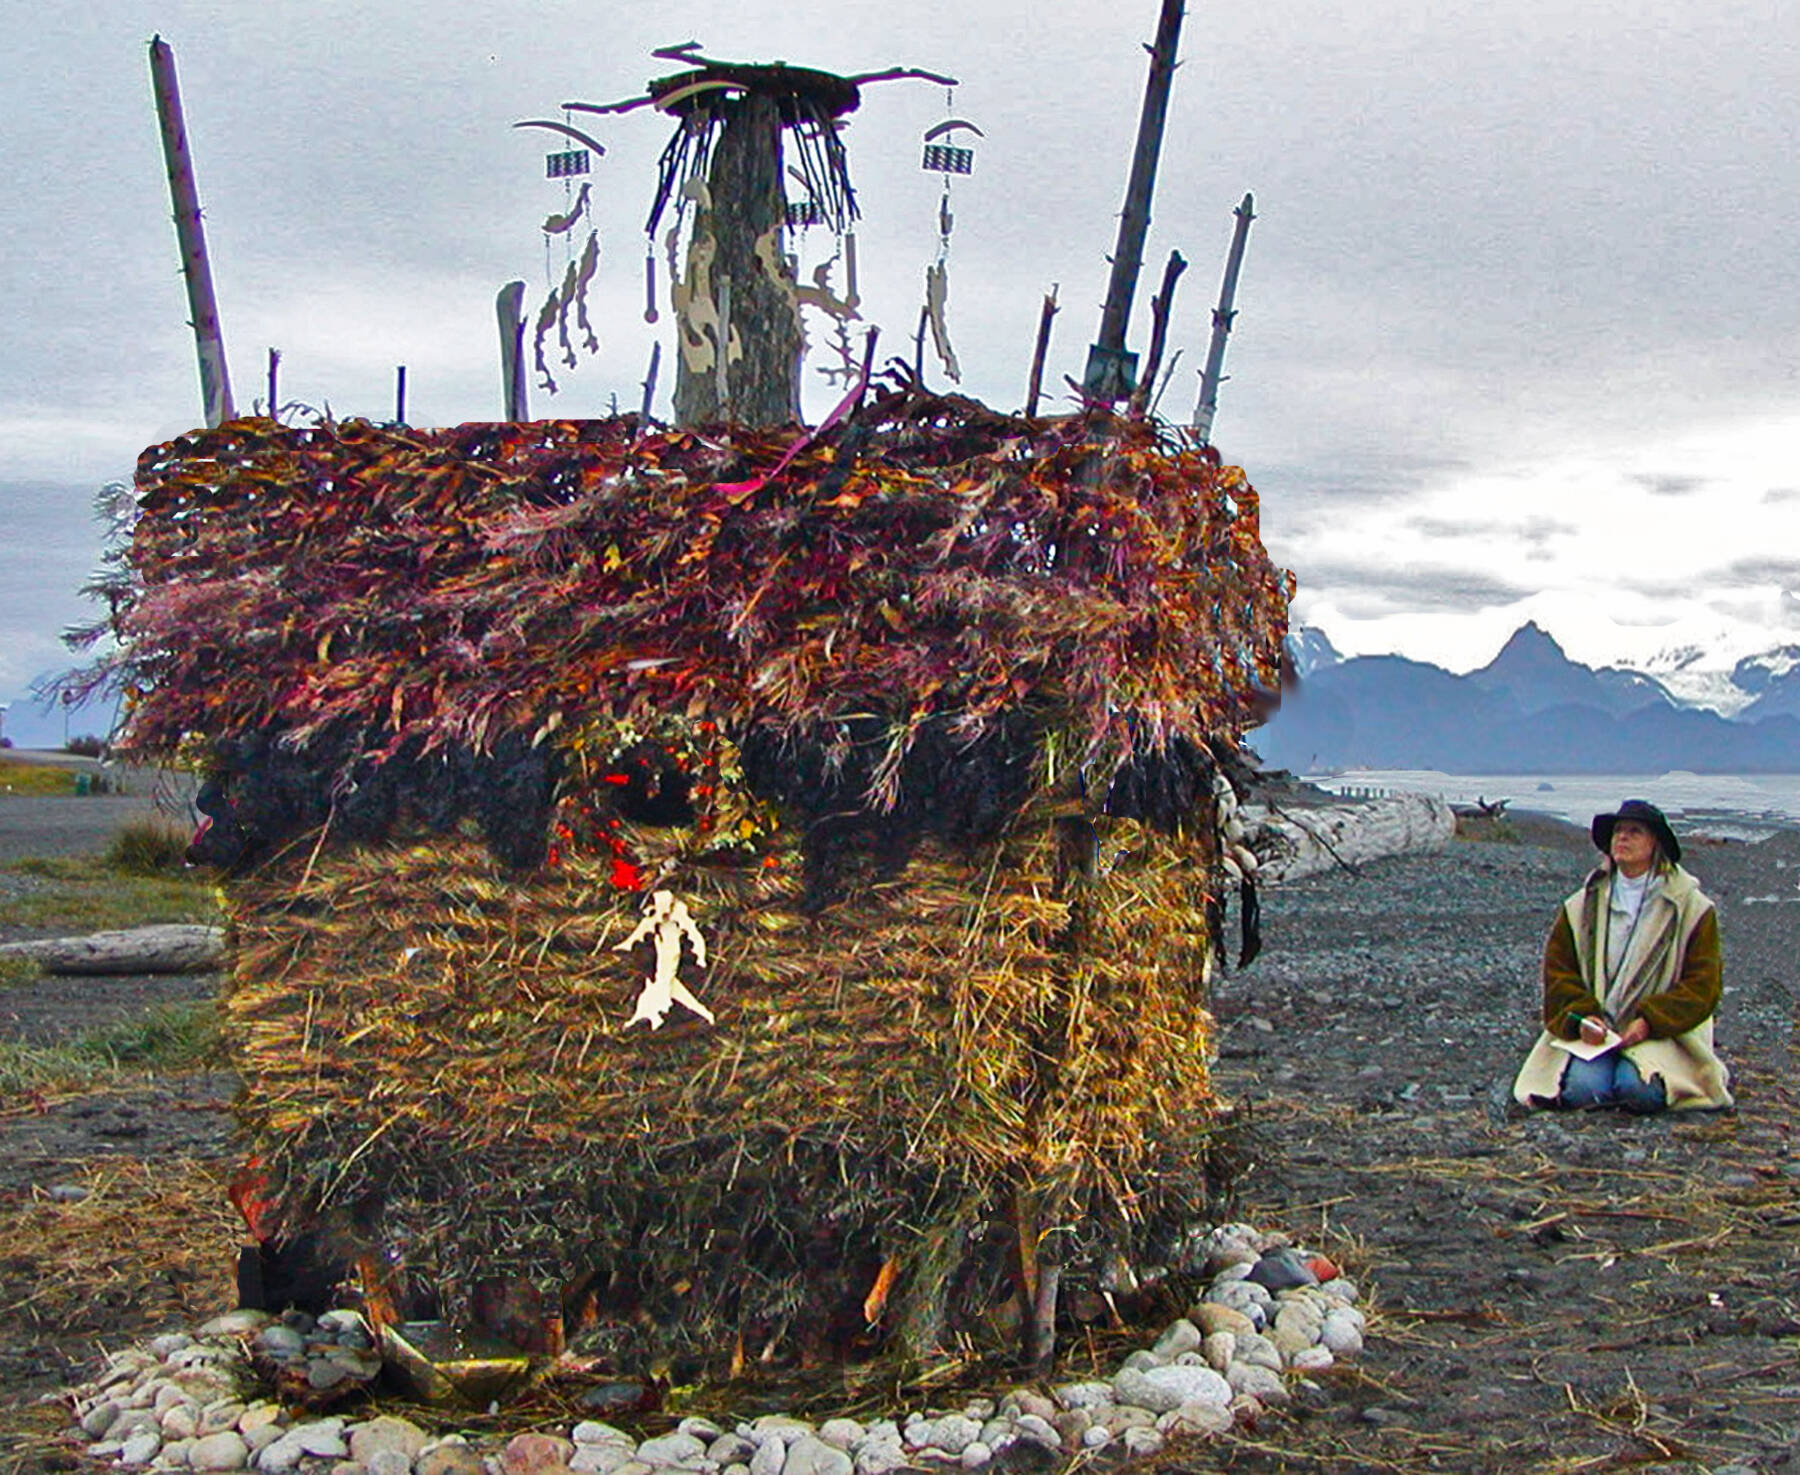 Homer artist Mavis Muller sits next to “Adieu,” the first Burning Basket created in 2004 by Muller with help from community volunteers in Homer, Alaska. Photo provided by Mavis Muller